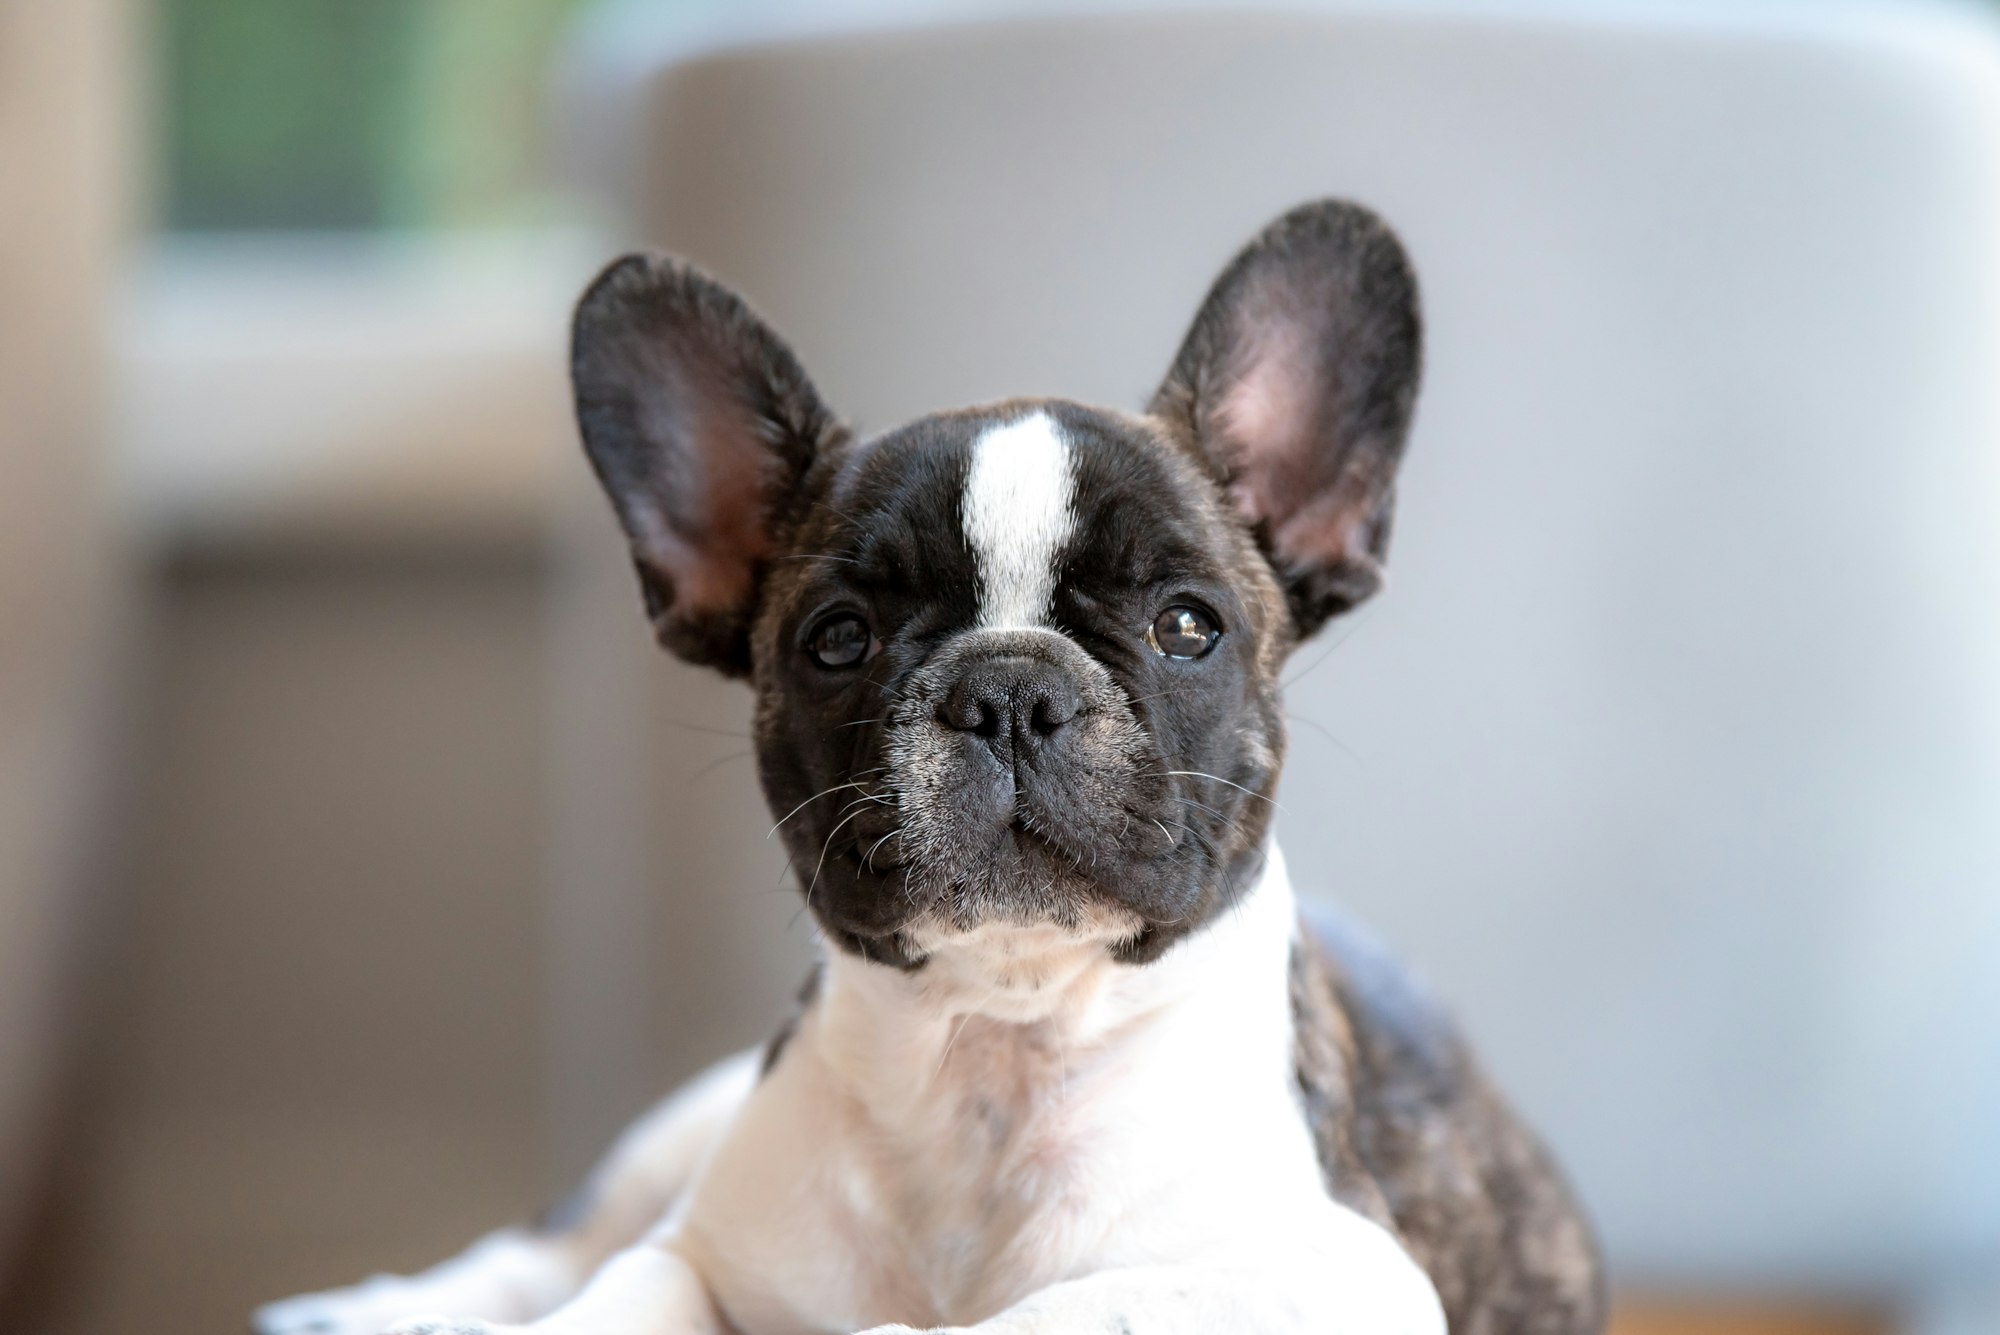 Nguni the french bulldog pup poses for the the camera.